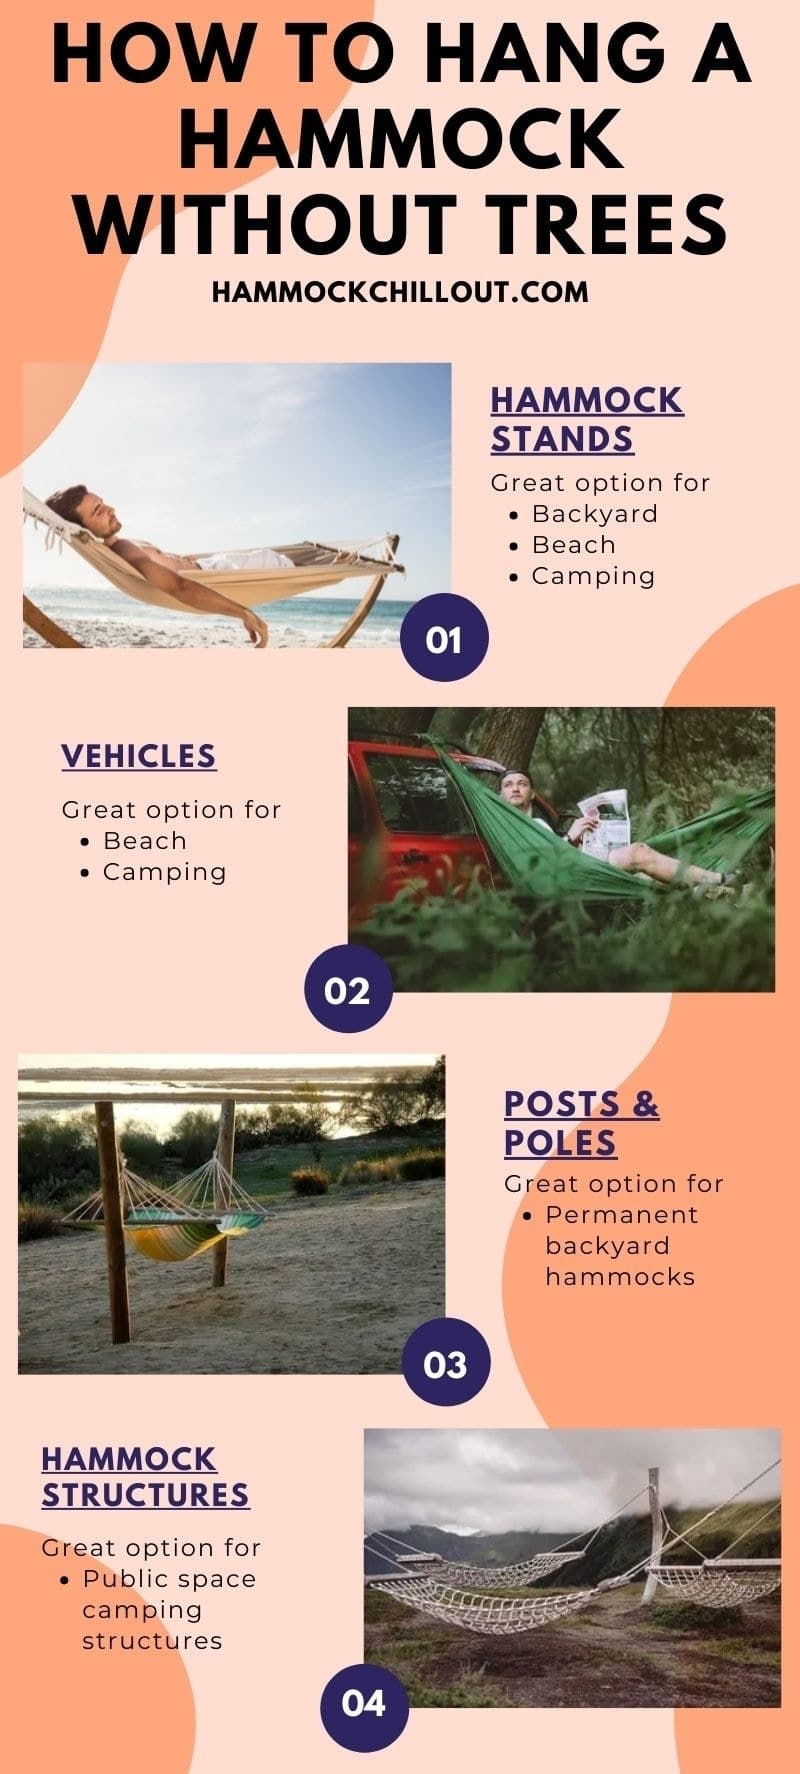 Ways to hang a hammock without trees infographic